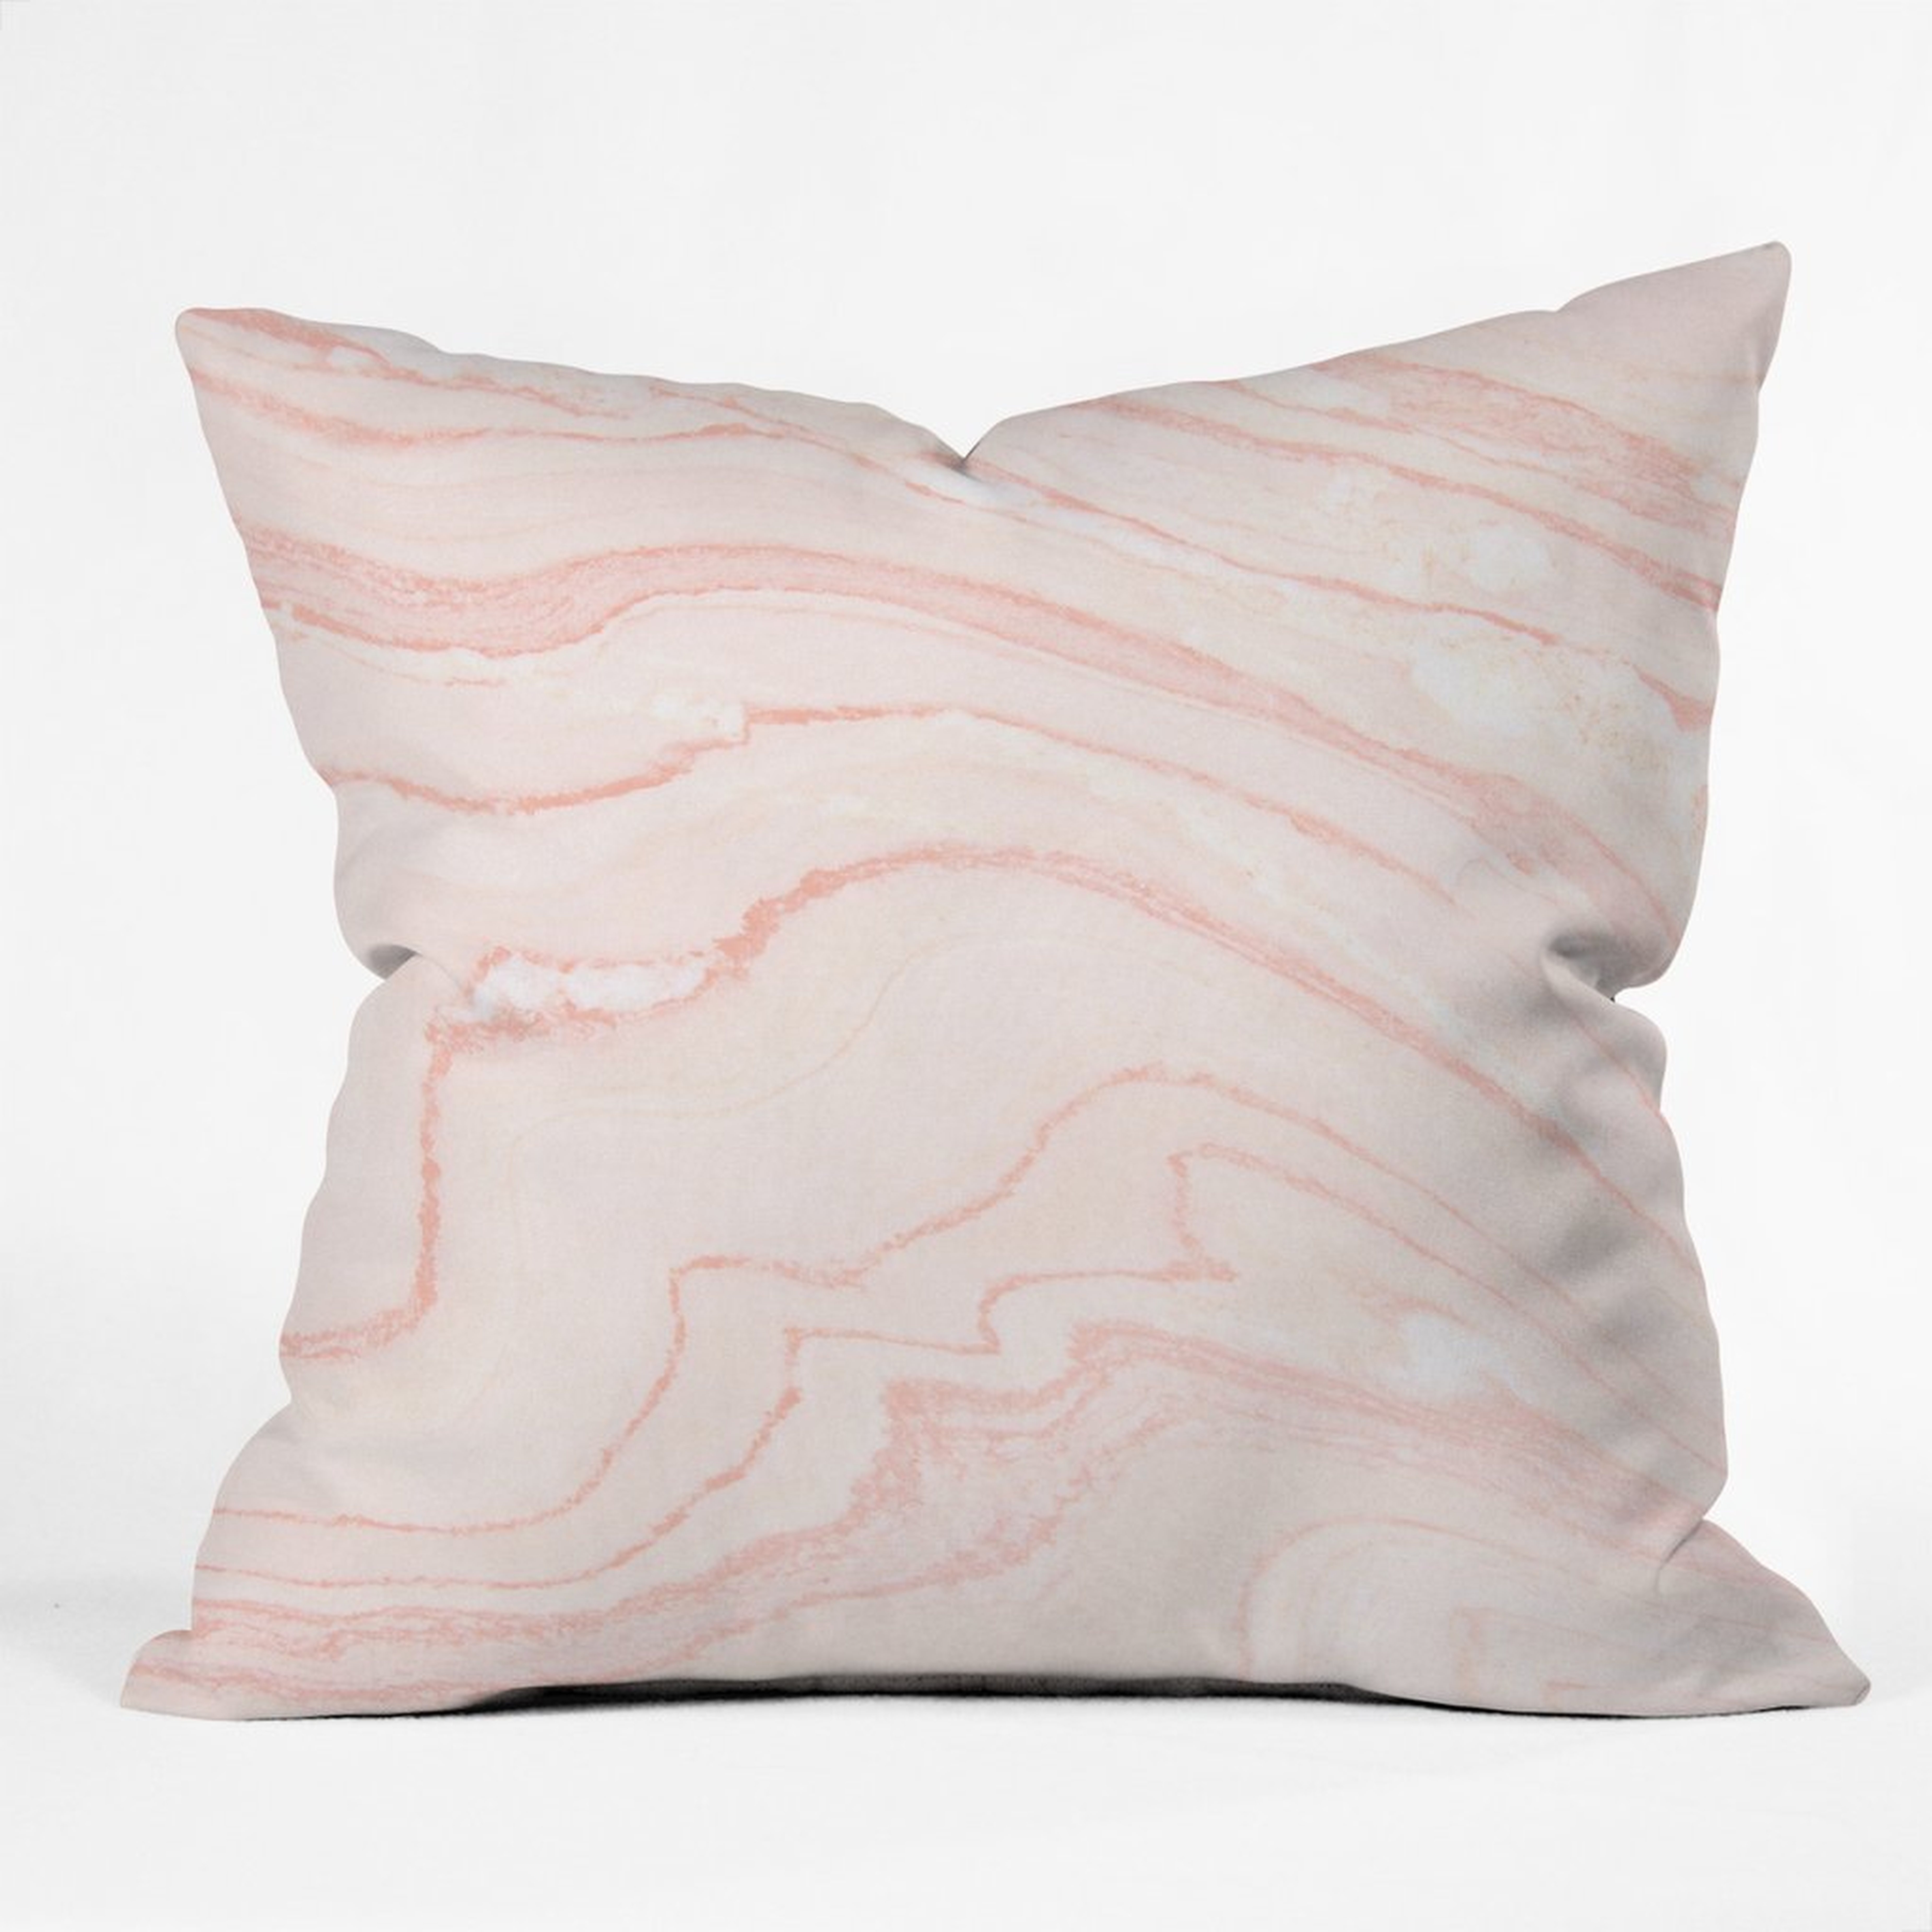 BLUSH MARBLE Euro Pillow - 26" x 26" - Polyester Fill Insert - Wander Print Co.